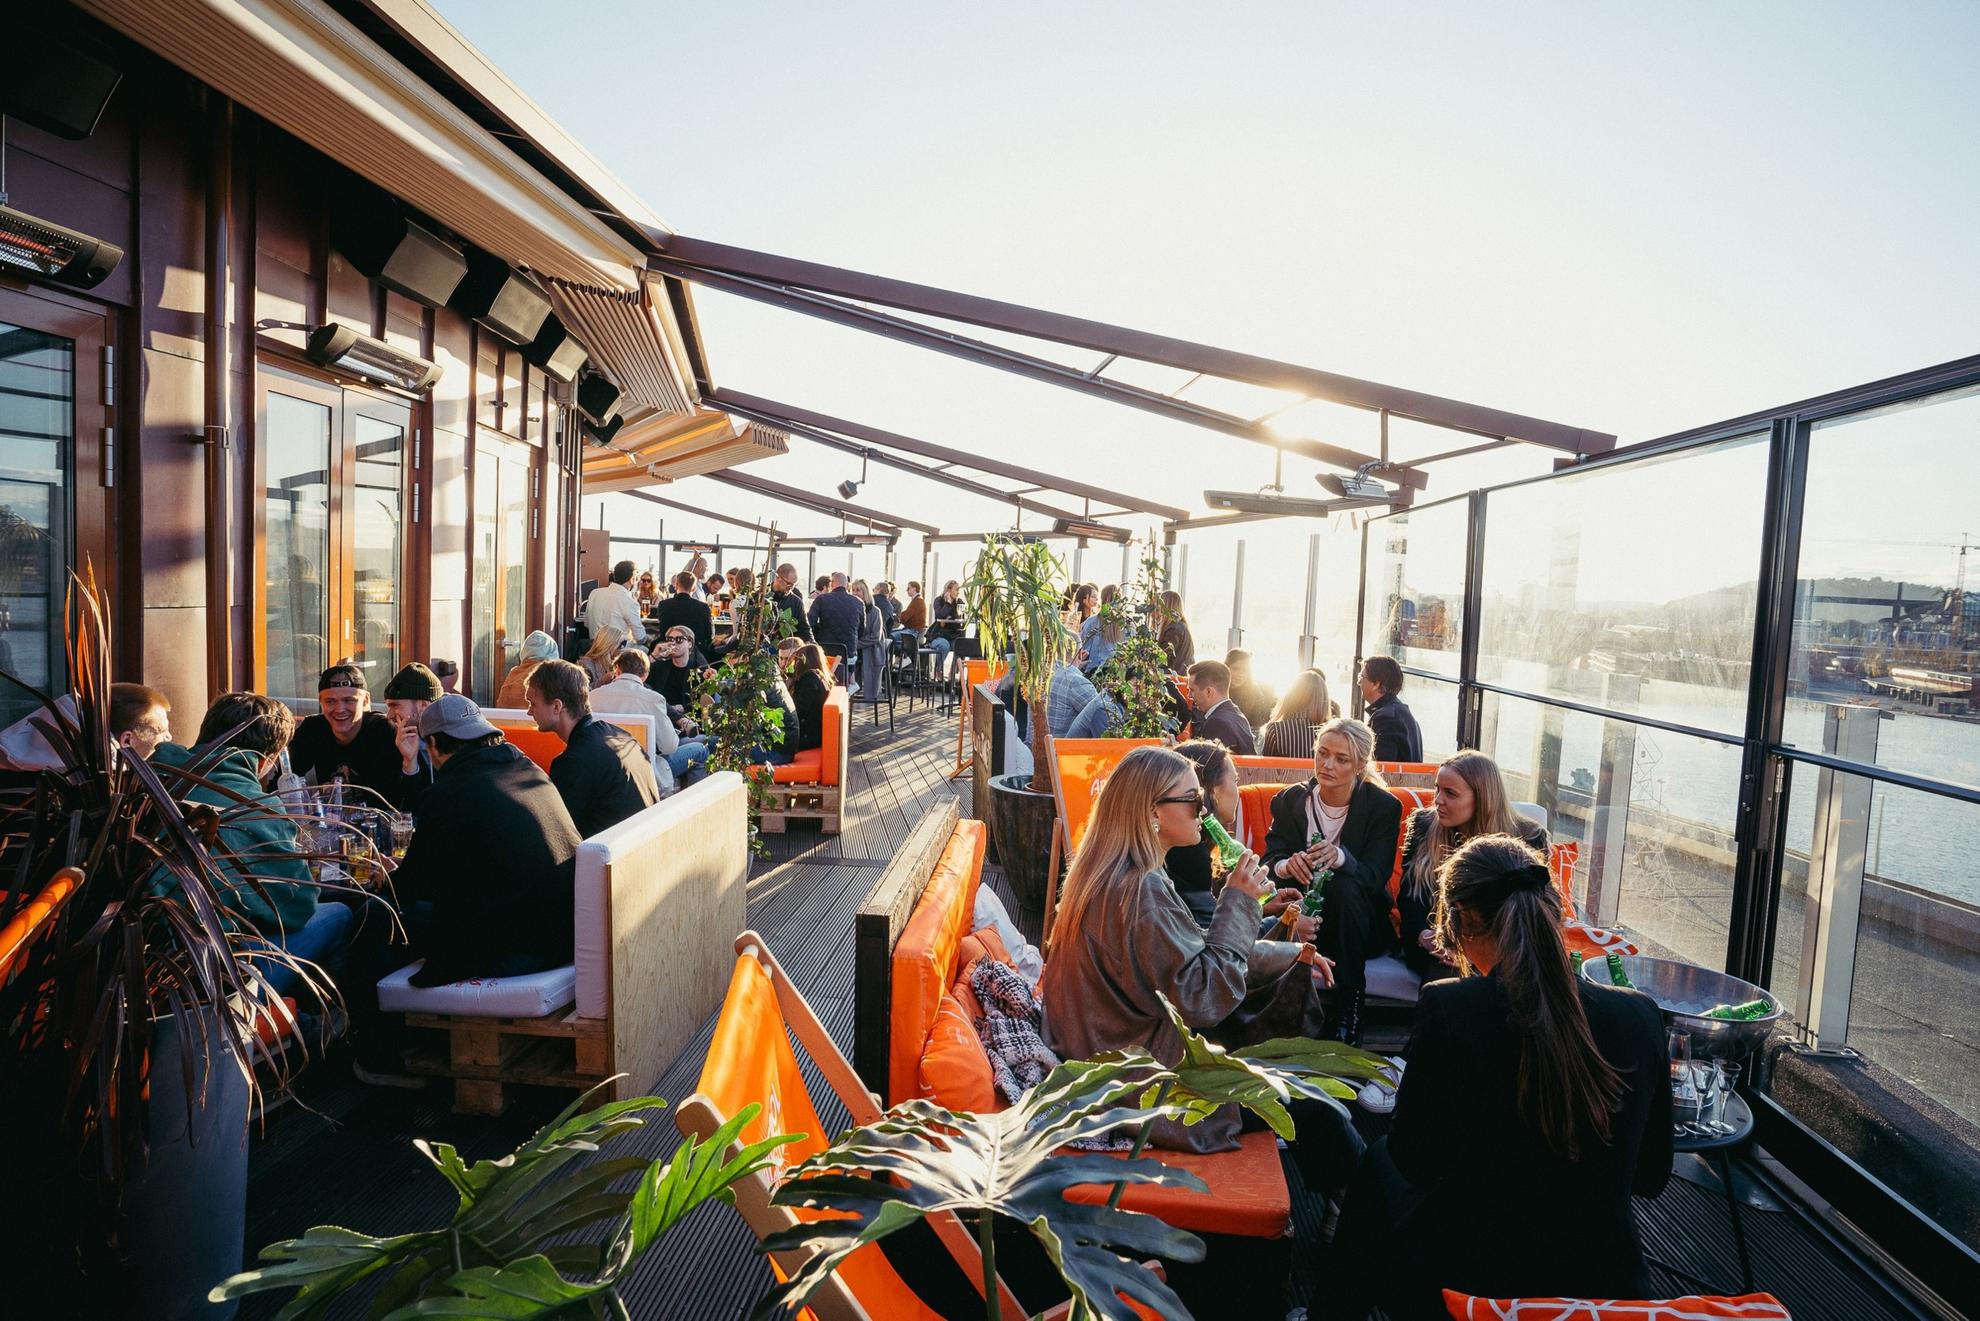 People sit and enjoy drinks and the company of friends at the rooftop Taket in Gothenburg.